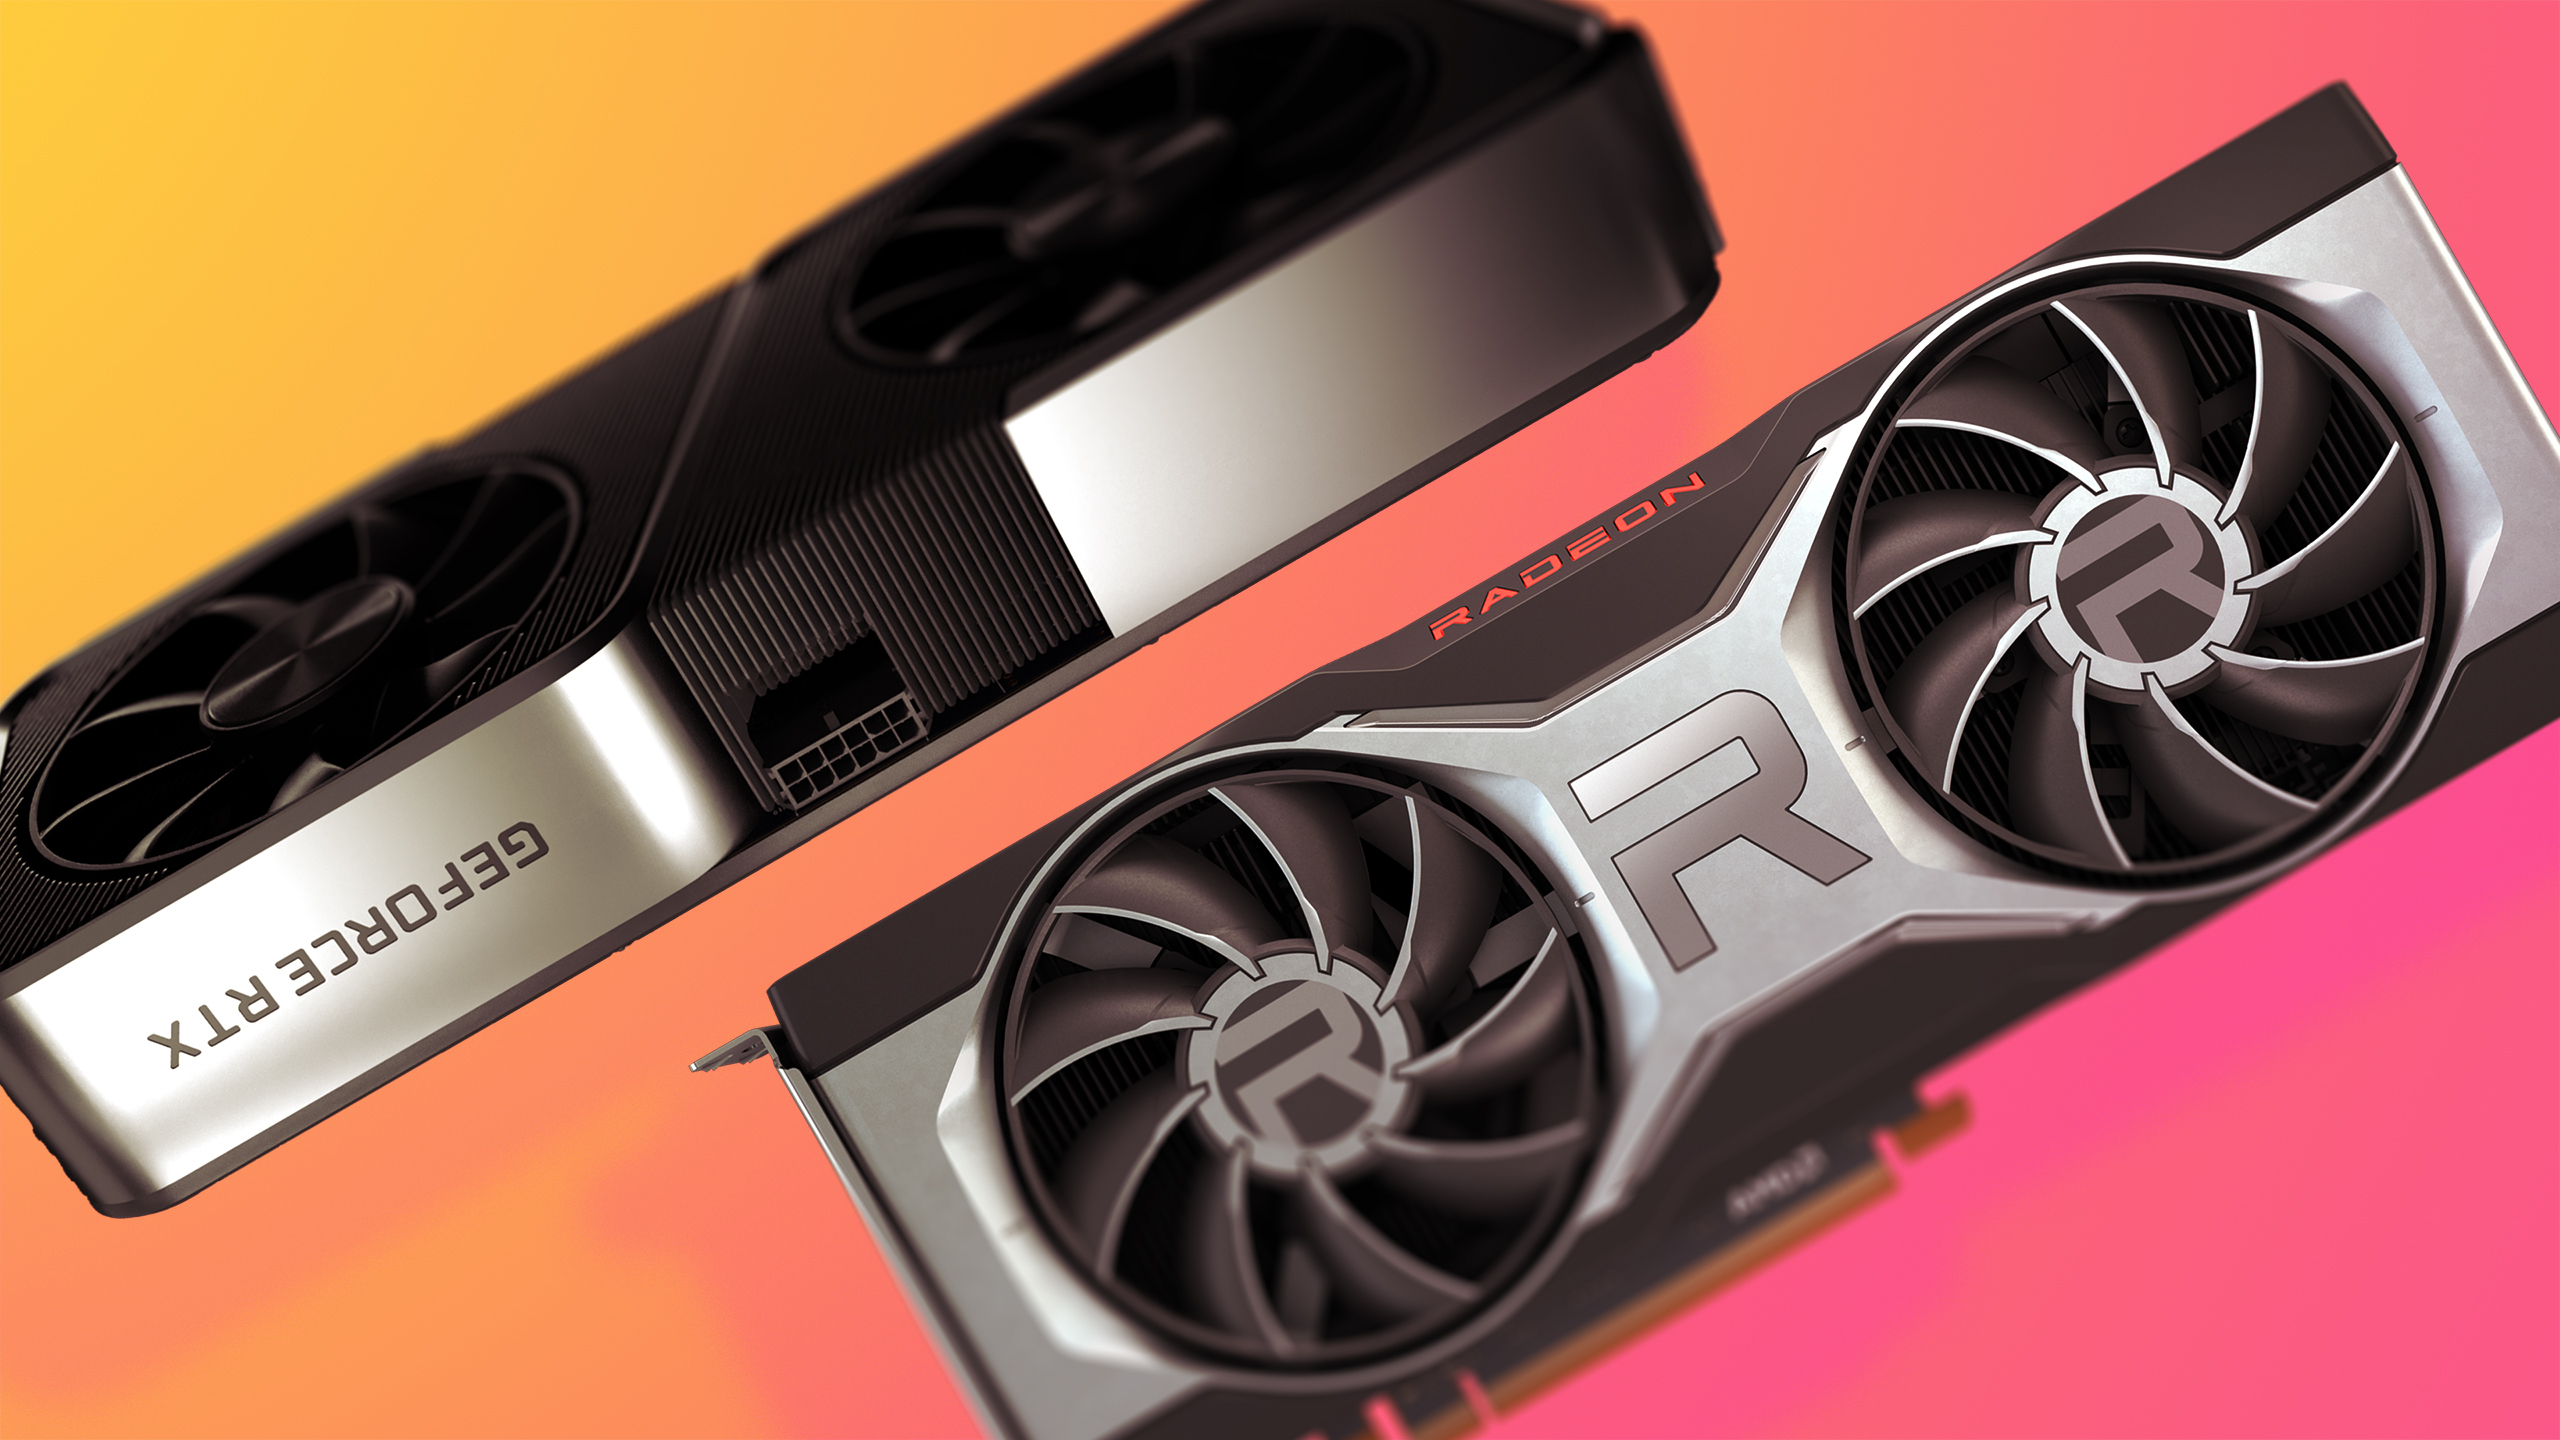 Nvidia RTX 3070 and AMD RX 6700 XT side by side on a colored background